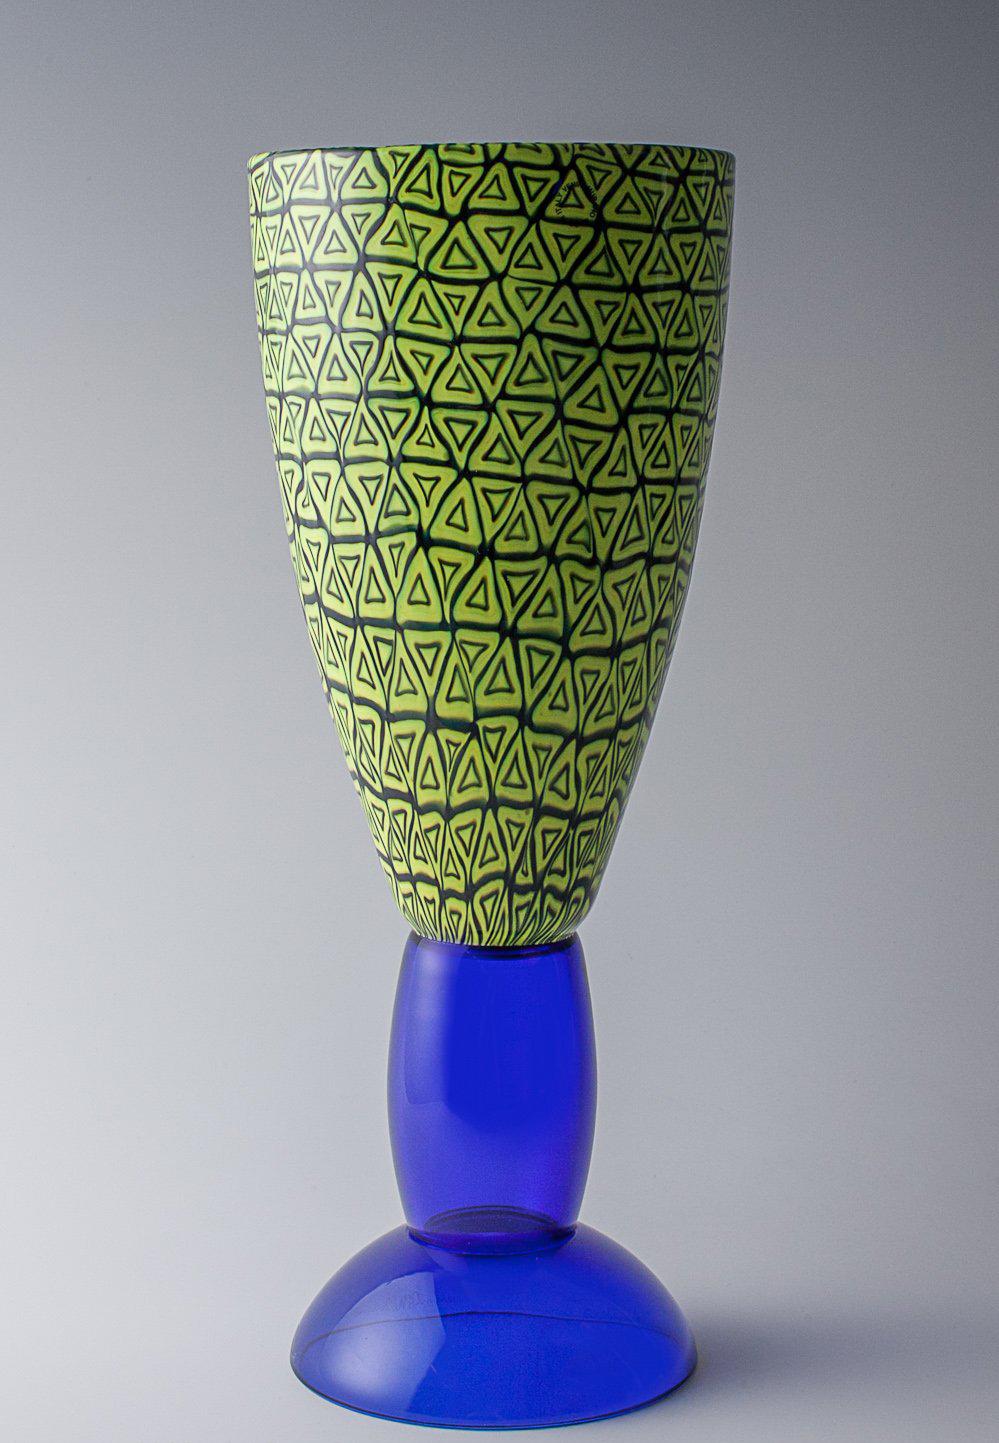 Alessandro Mendini. 'Grande Brindisi' vase, designed in 2000. H. 40.1 cm. Made by Venini & C., Murano.
Blue glass, coupe inside and out with fused murrhine in yellow and deep purple. Marked: Venini Millennium III 45/ 99 A. Mendini (engraved);